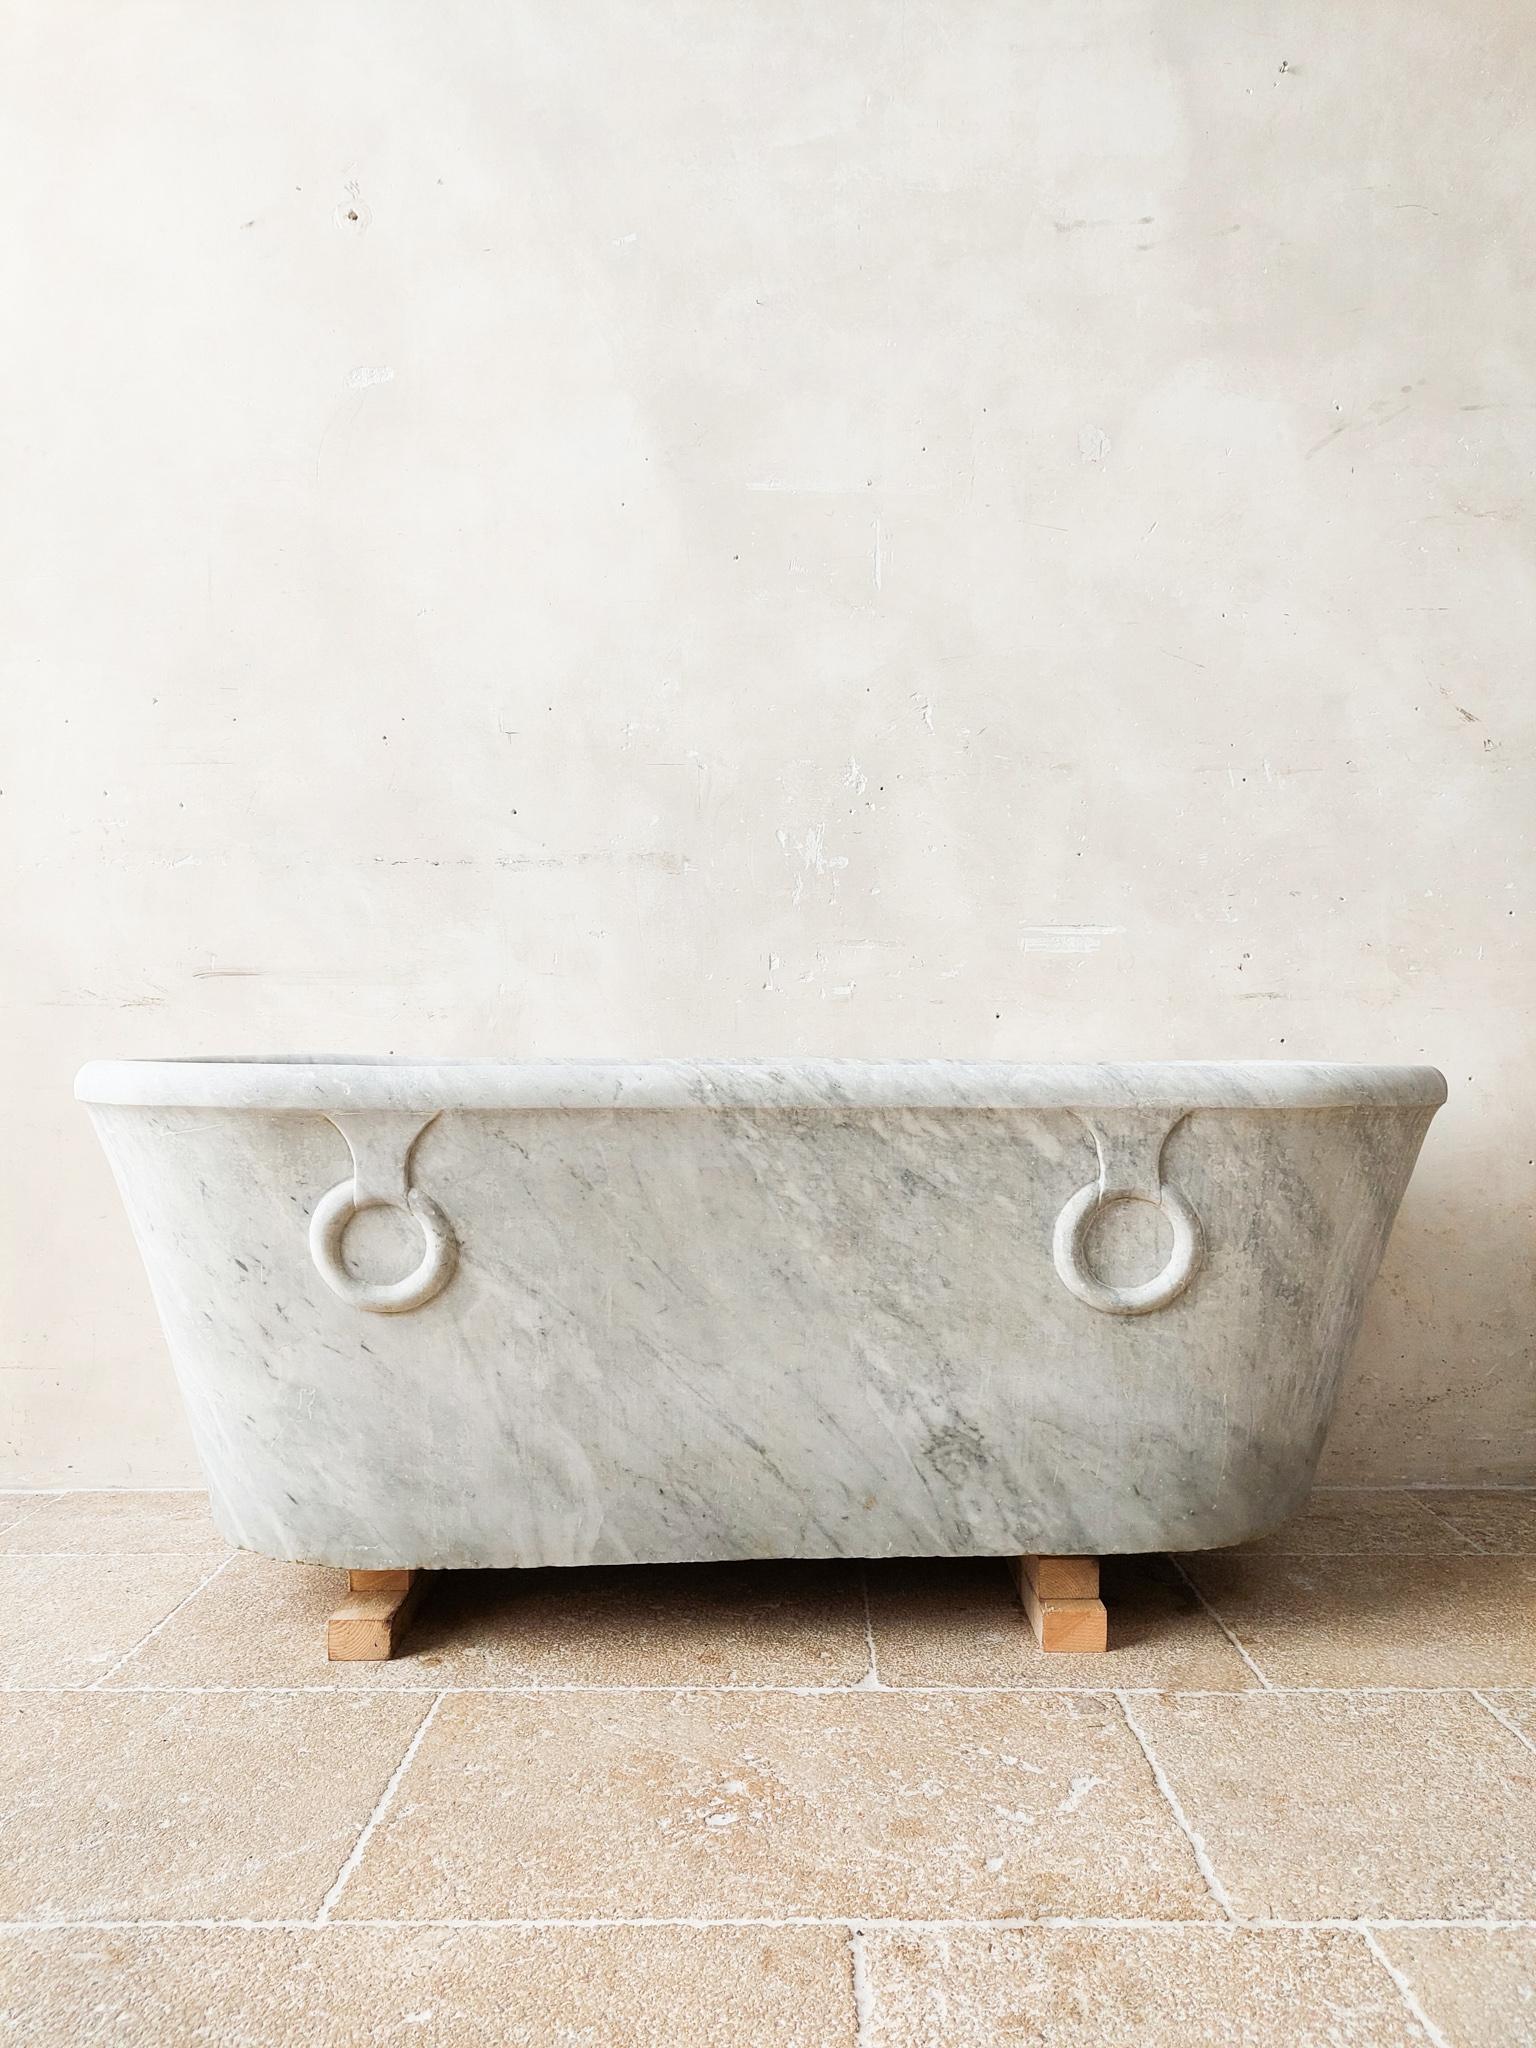 Empire Antique Carrara Marble Bathtub from the Early 19th Century For Sale